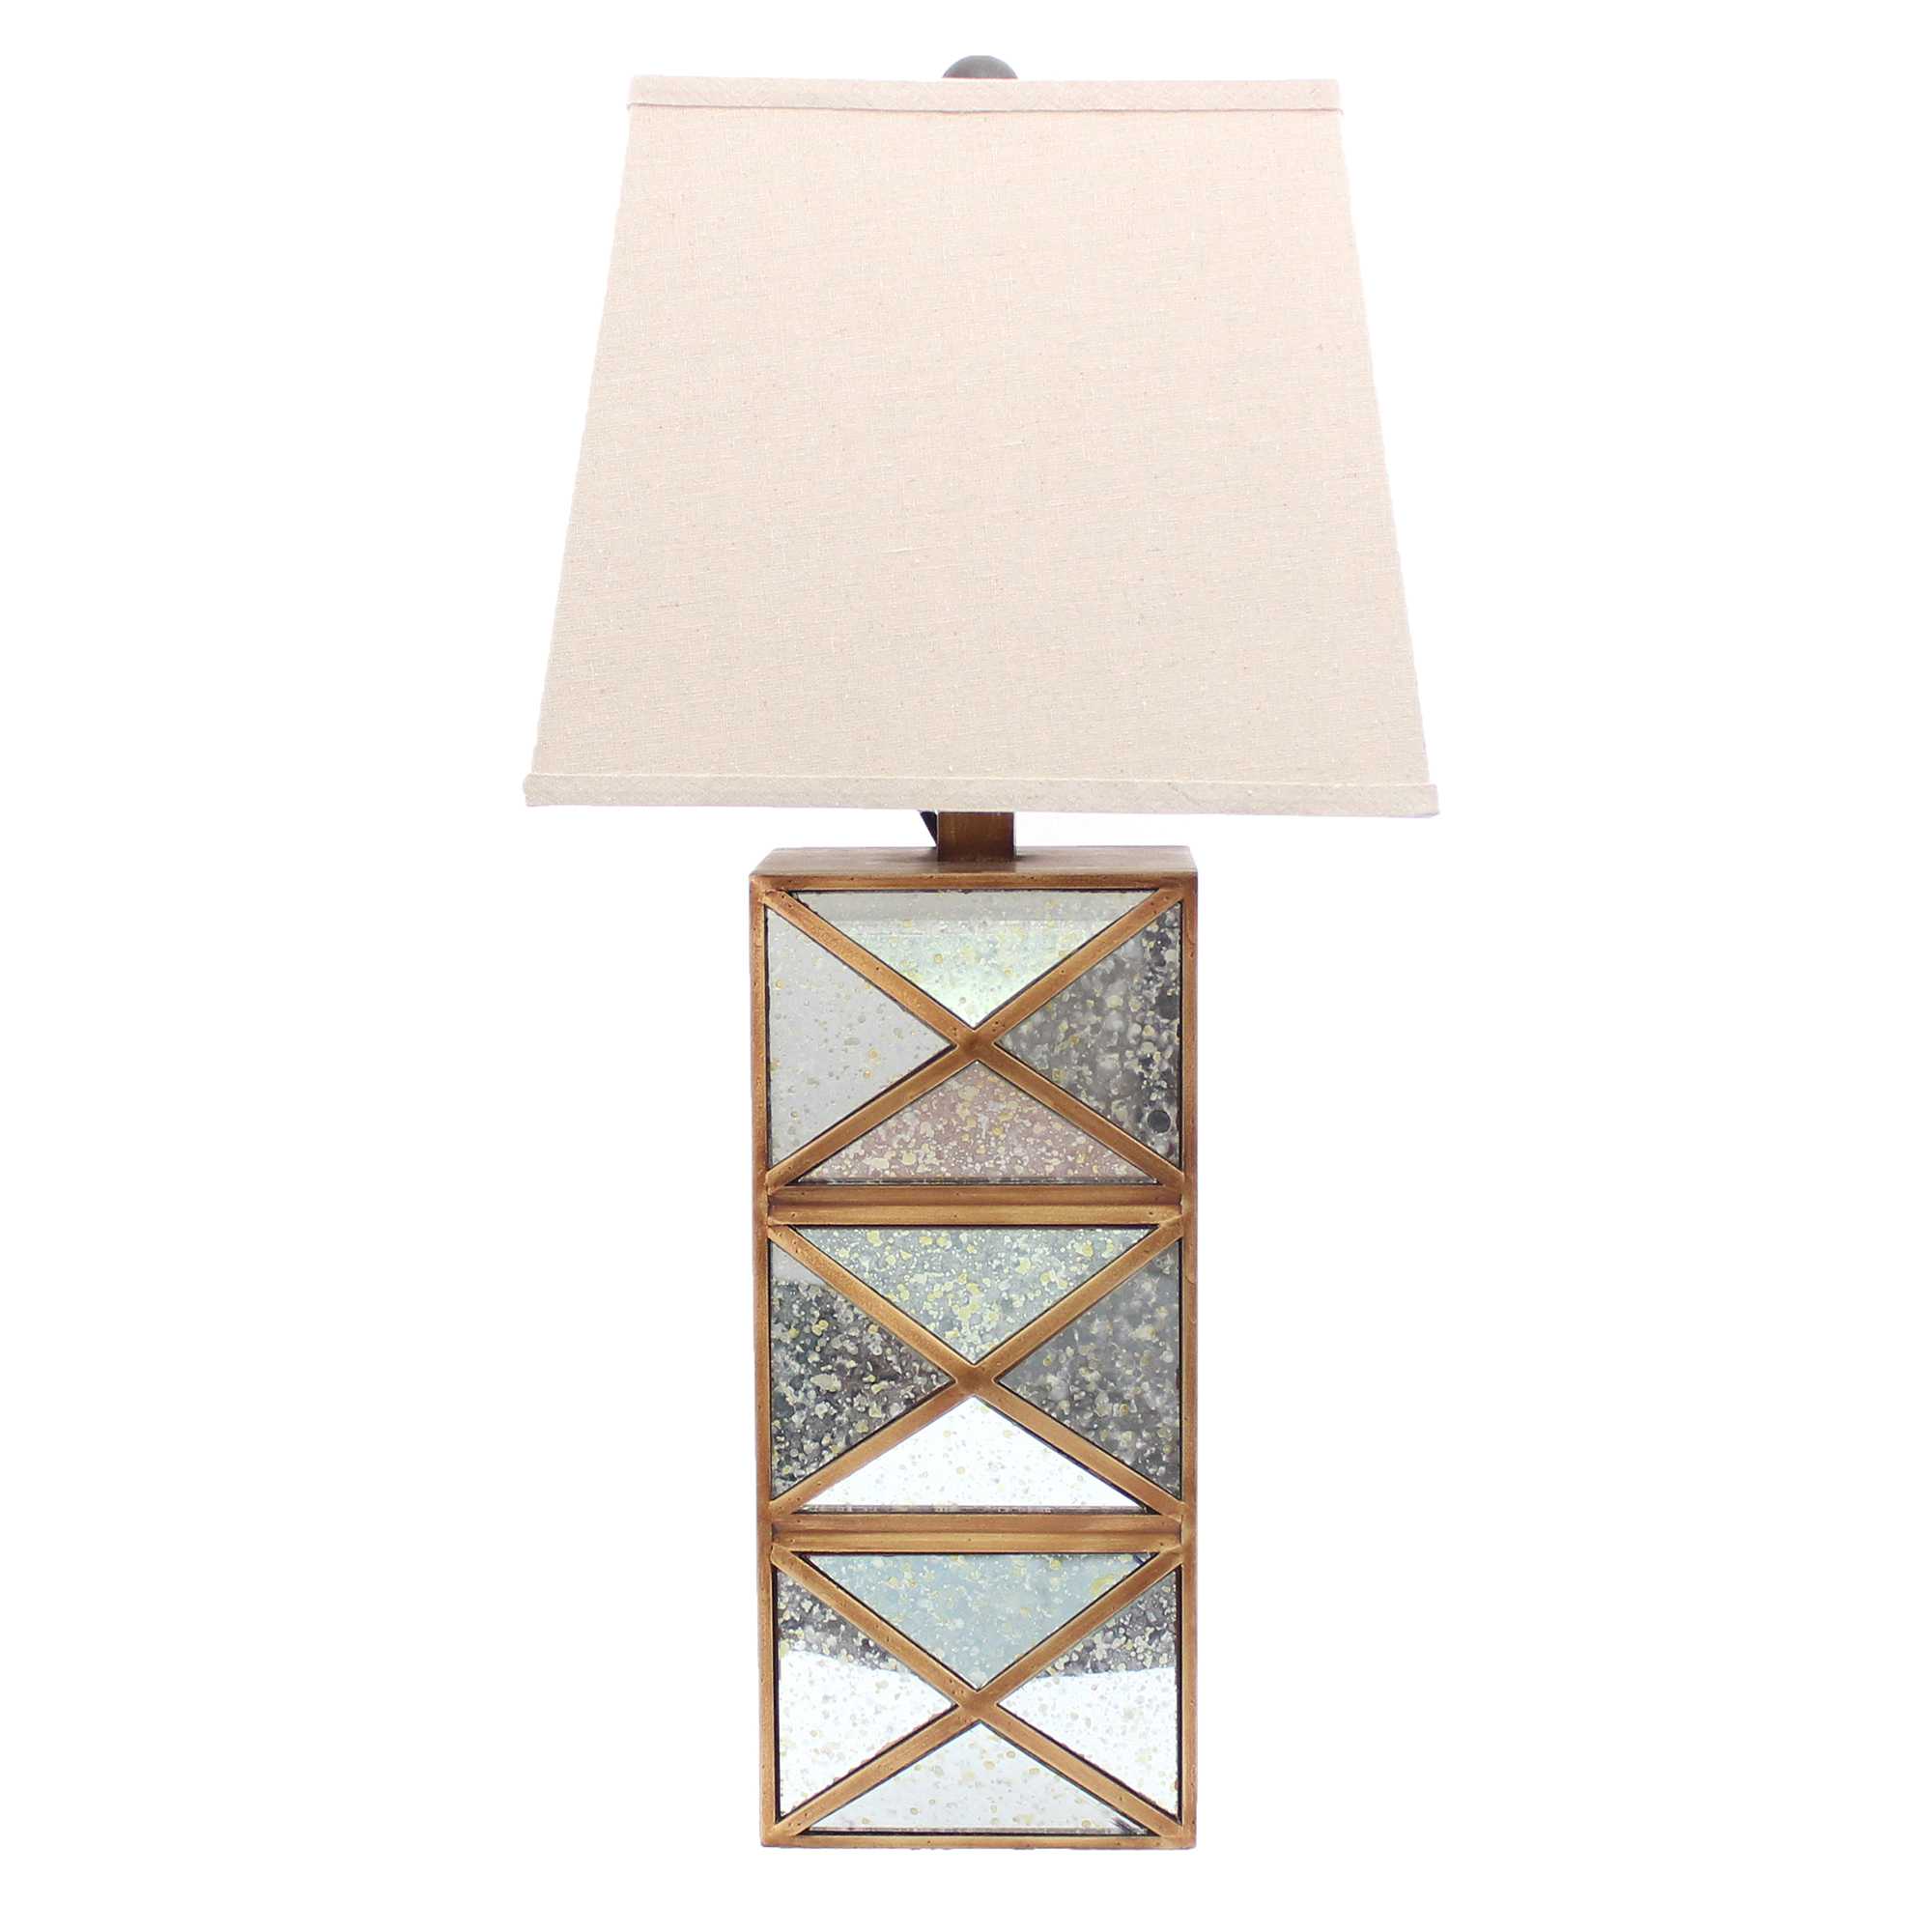 6.25" x 6.75" x 27.5" Gold, Modern Illusionary, Mirrored Base - Table Lamp